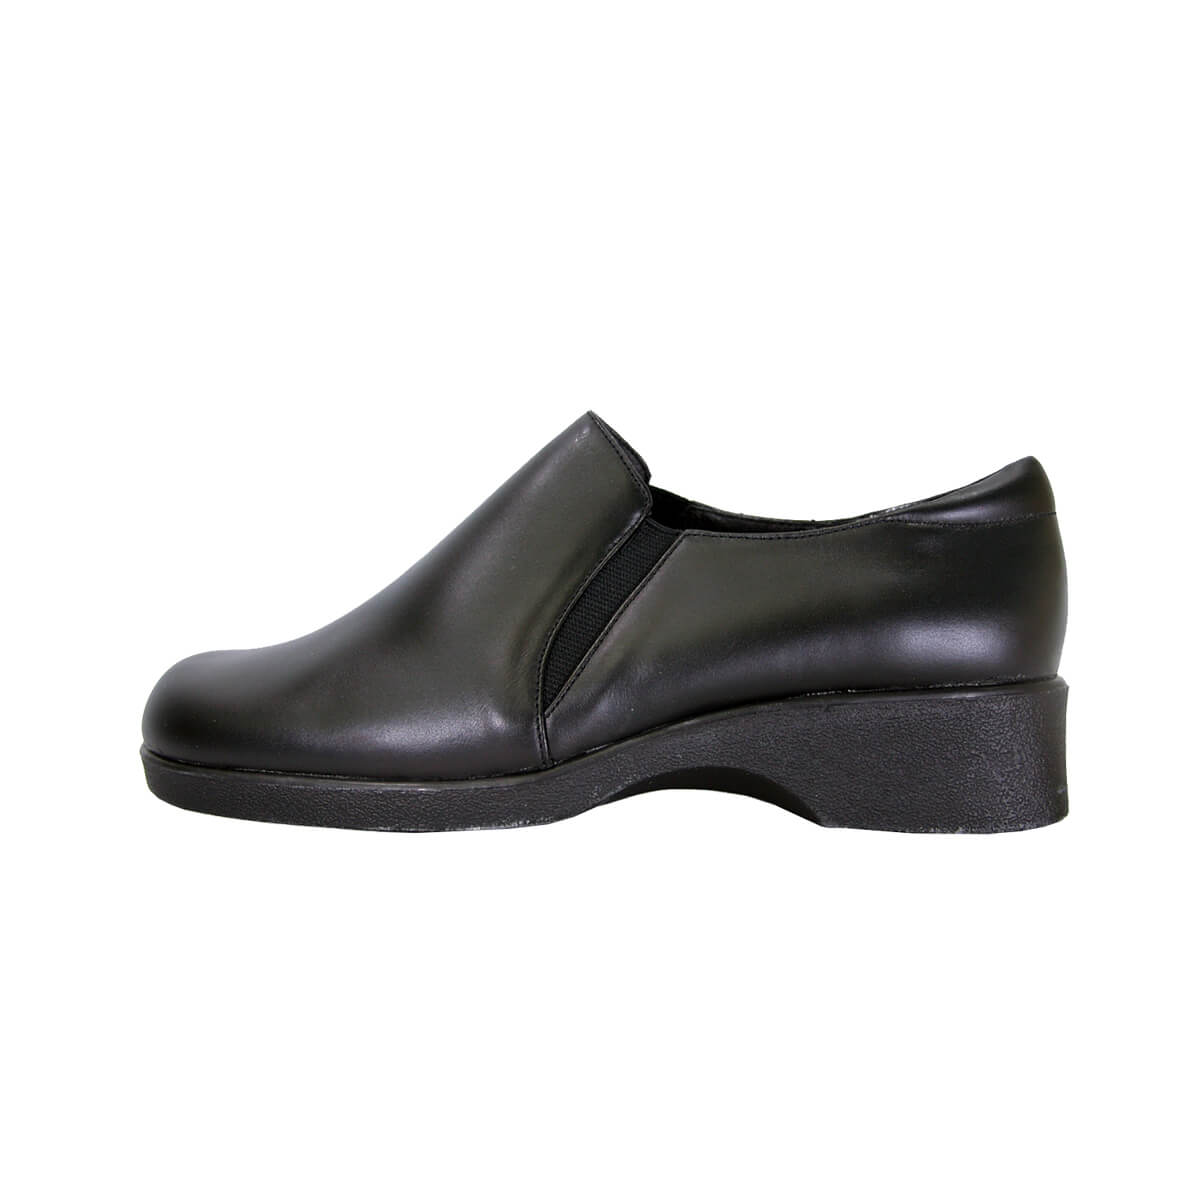 24 HOUR COMFORT Laila Women's Wide Width Leather Slip-On Shoes